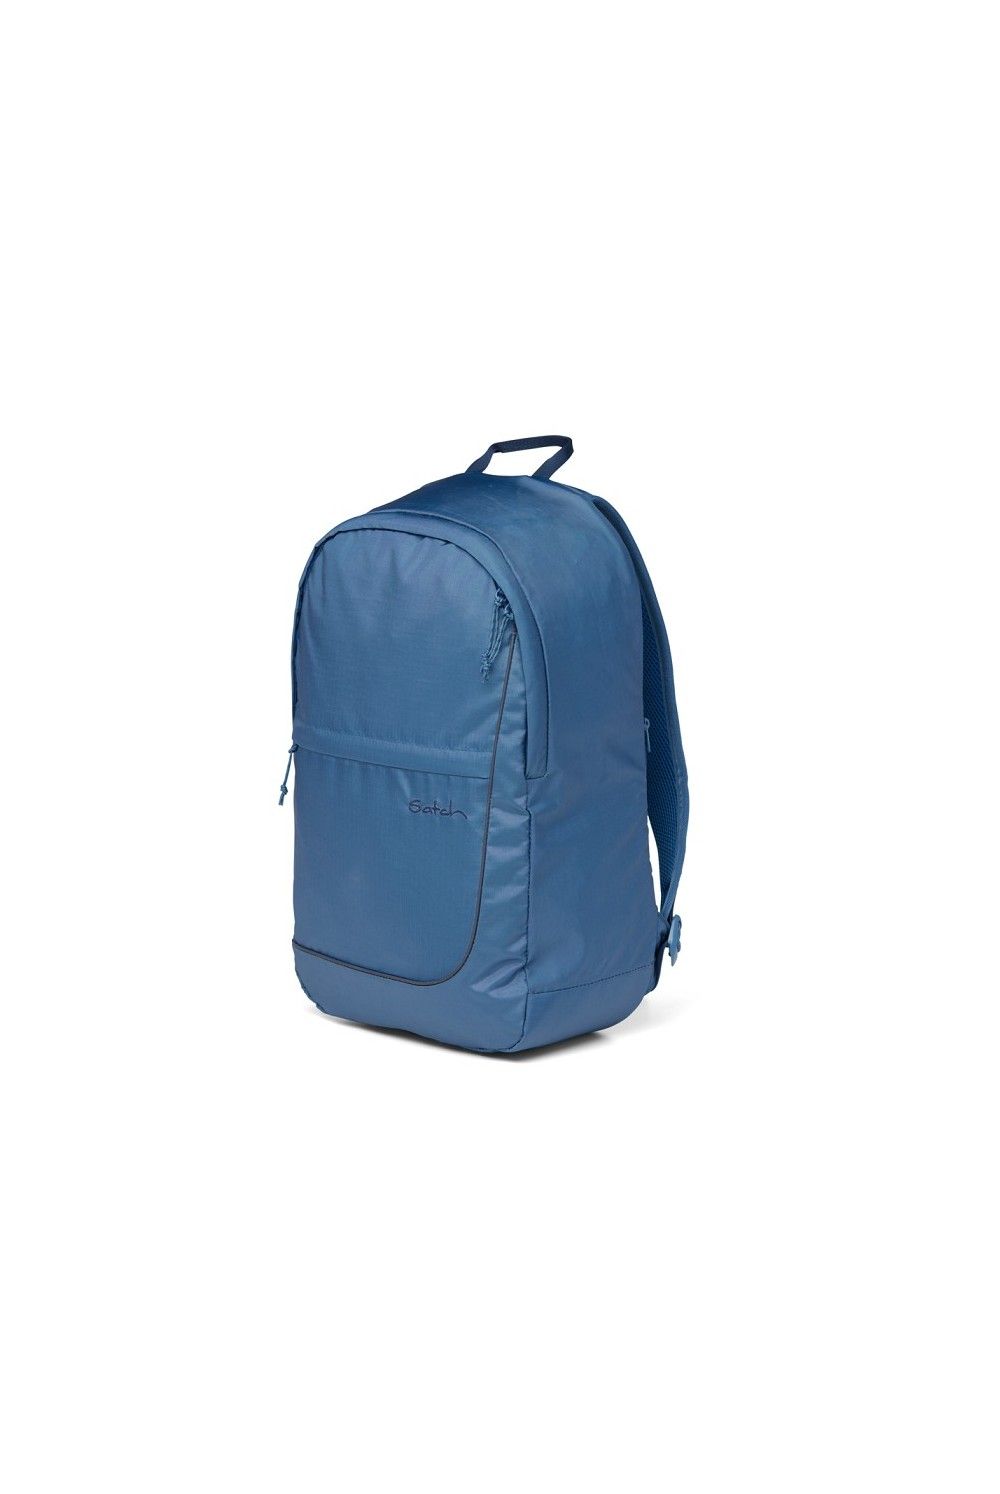 Satch Fly Rucksack Ripstop Blue